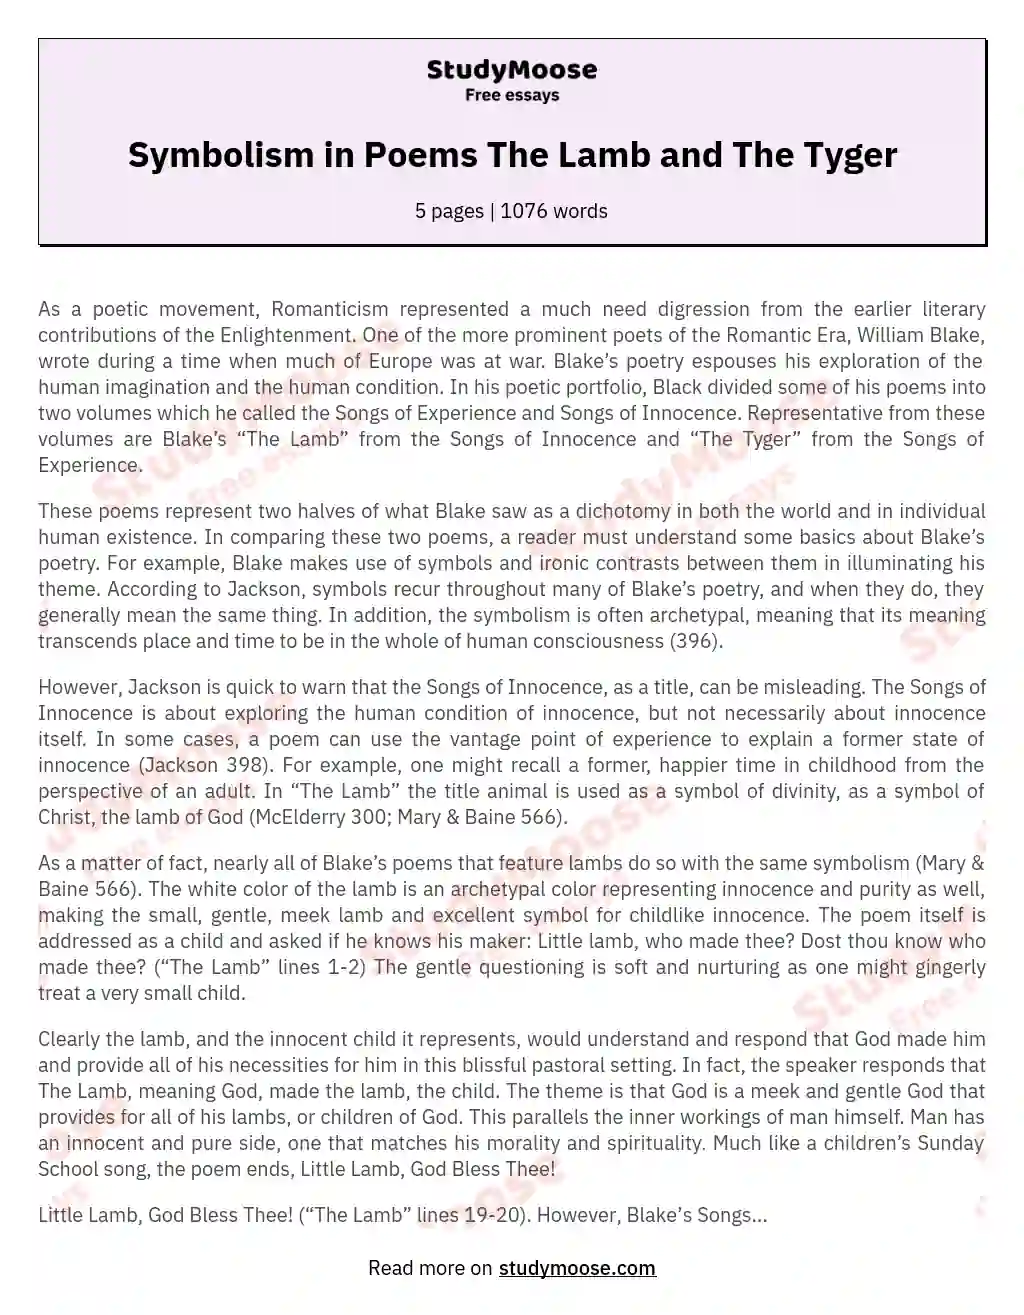 Symbolism in Poems The Lamb and The Tyger essay